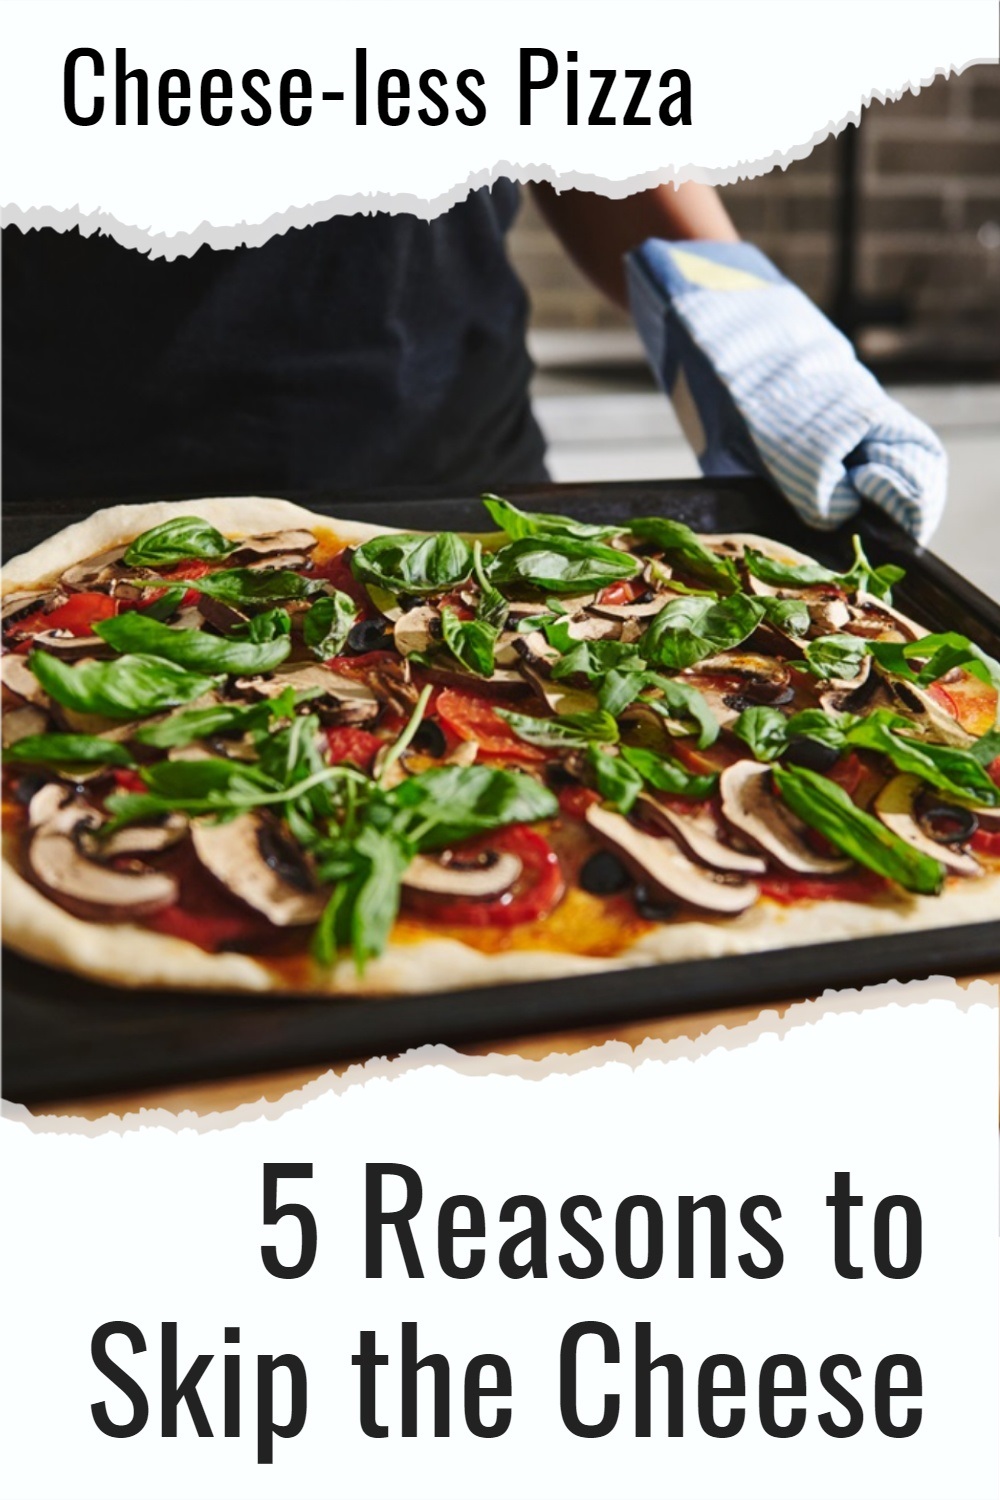 5 Reasons to Choose Cheese-less Pizza + 20 Dairy-Free Topping Ideas